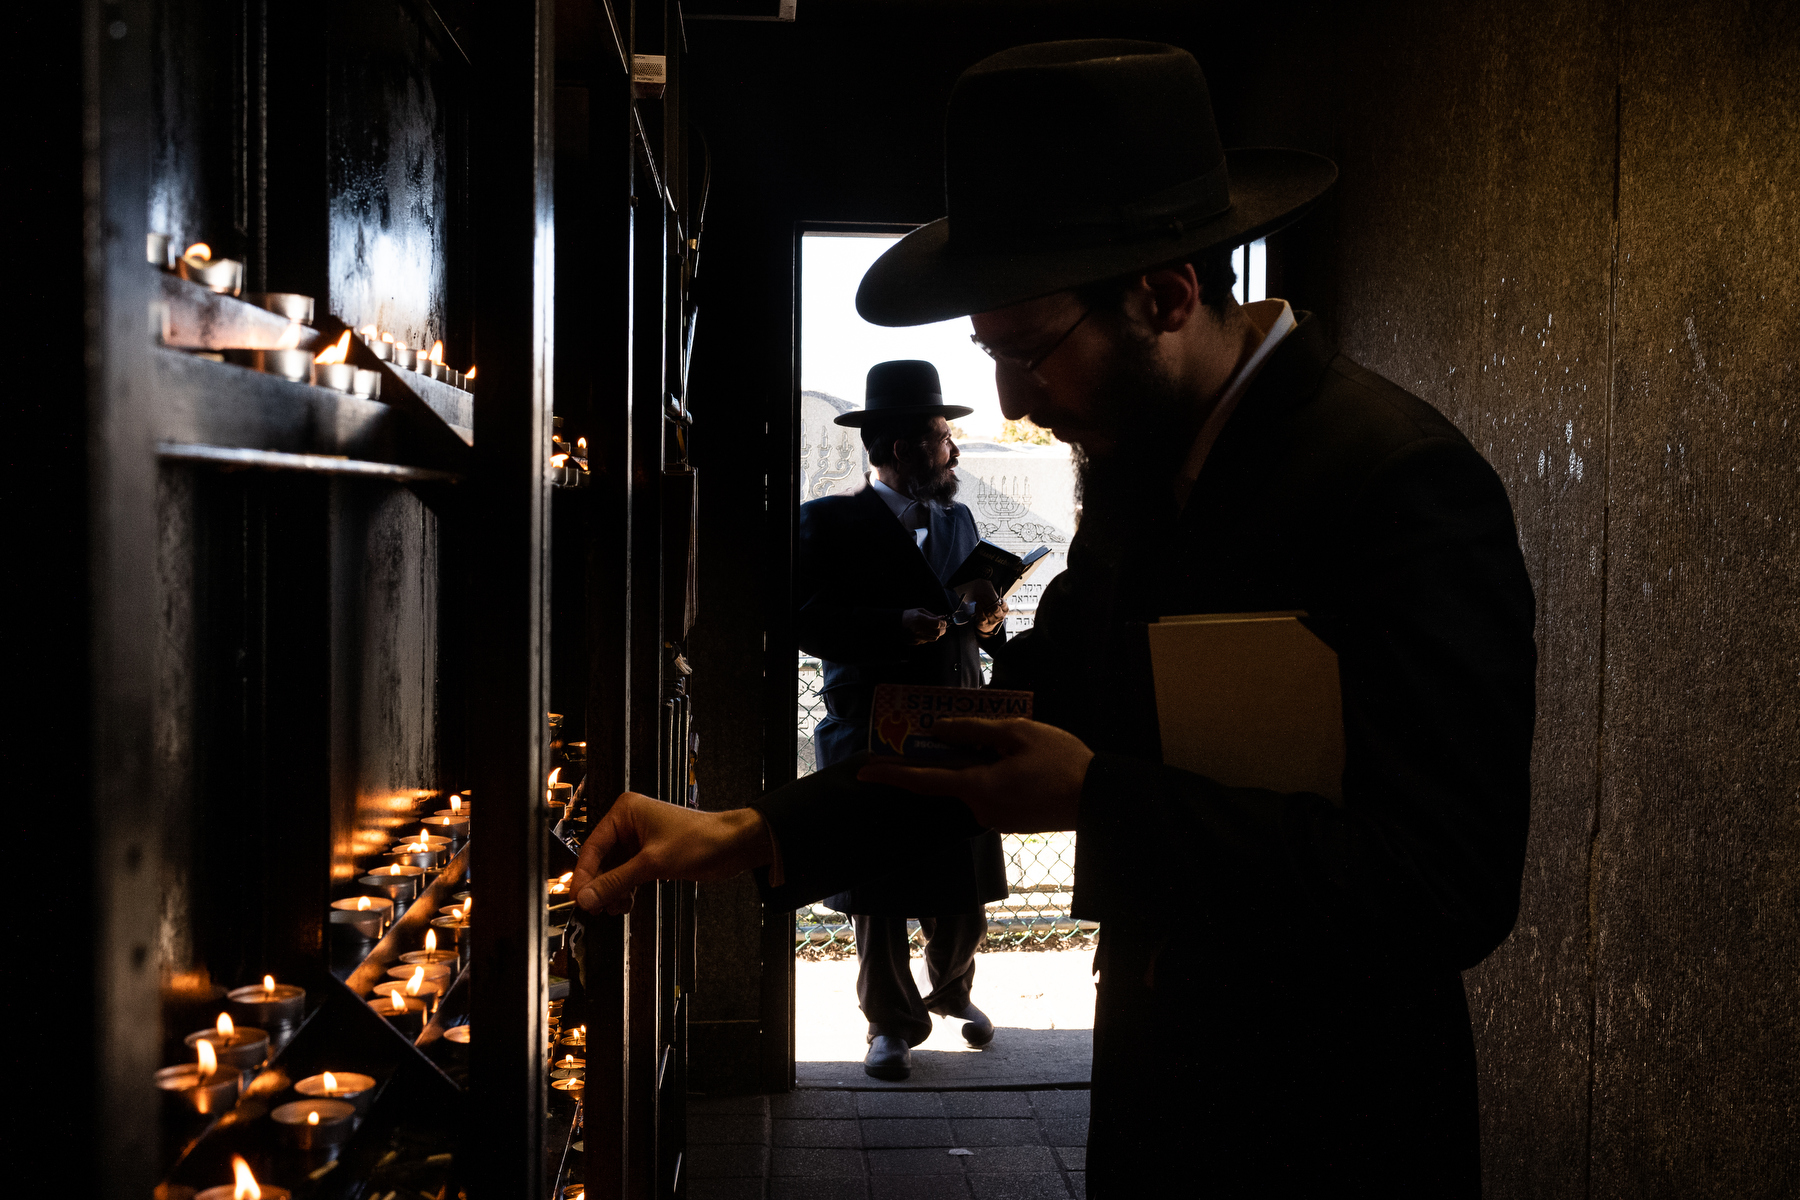  A Chabad-Lubavitch rabbi light candles as he prepares to pray at the Ohel, the gravesite of the Lubavitcher Rebbe Menachem M. Schneerson in Queens, NY. 